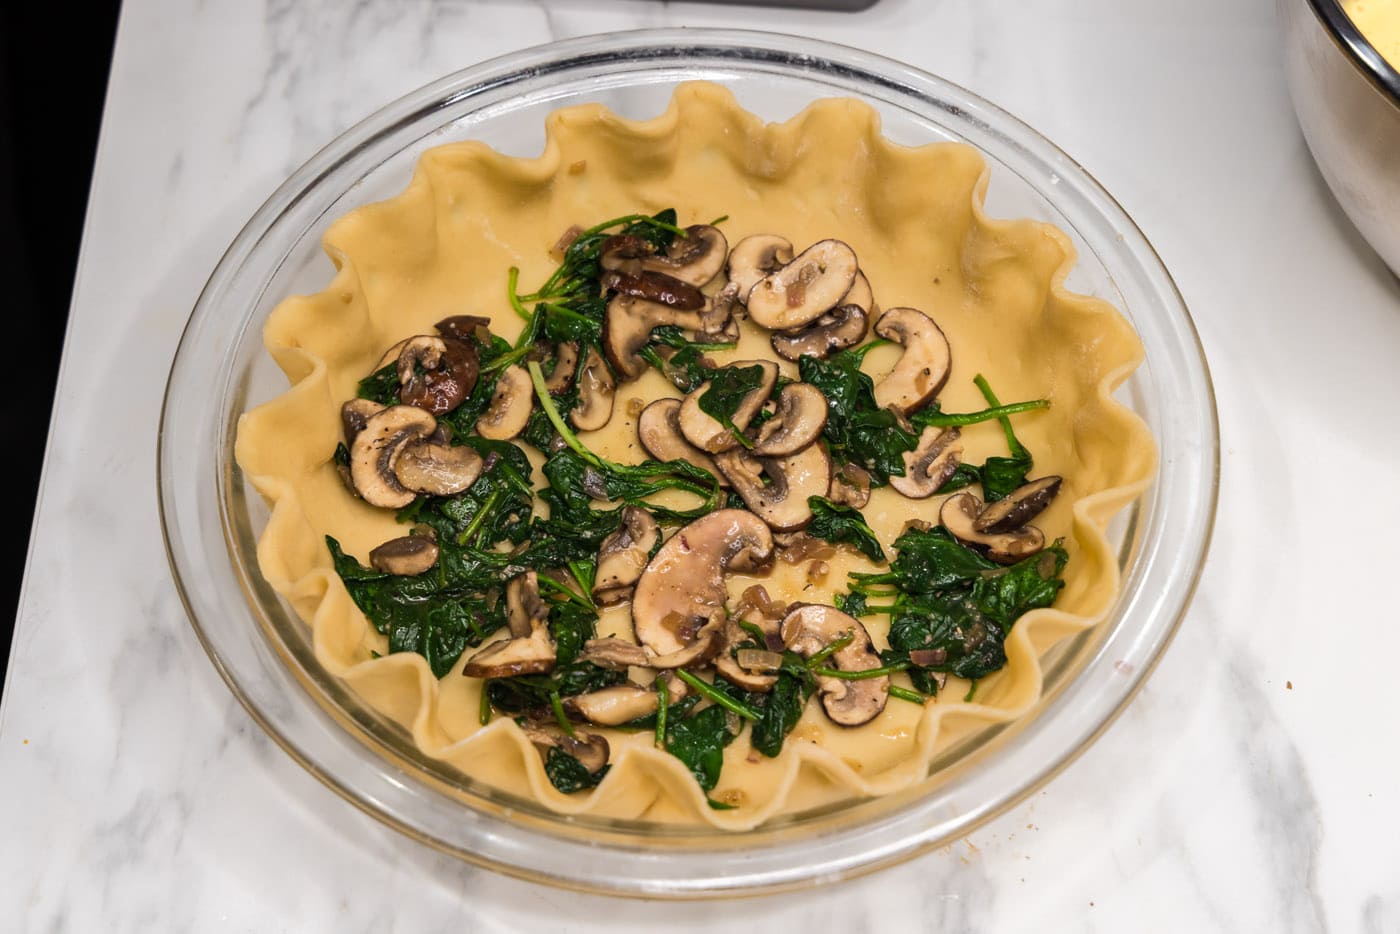 sauteed mushroom and spinach in a pie crust